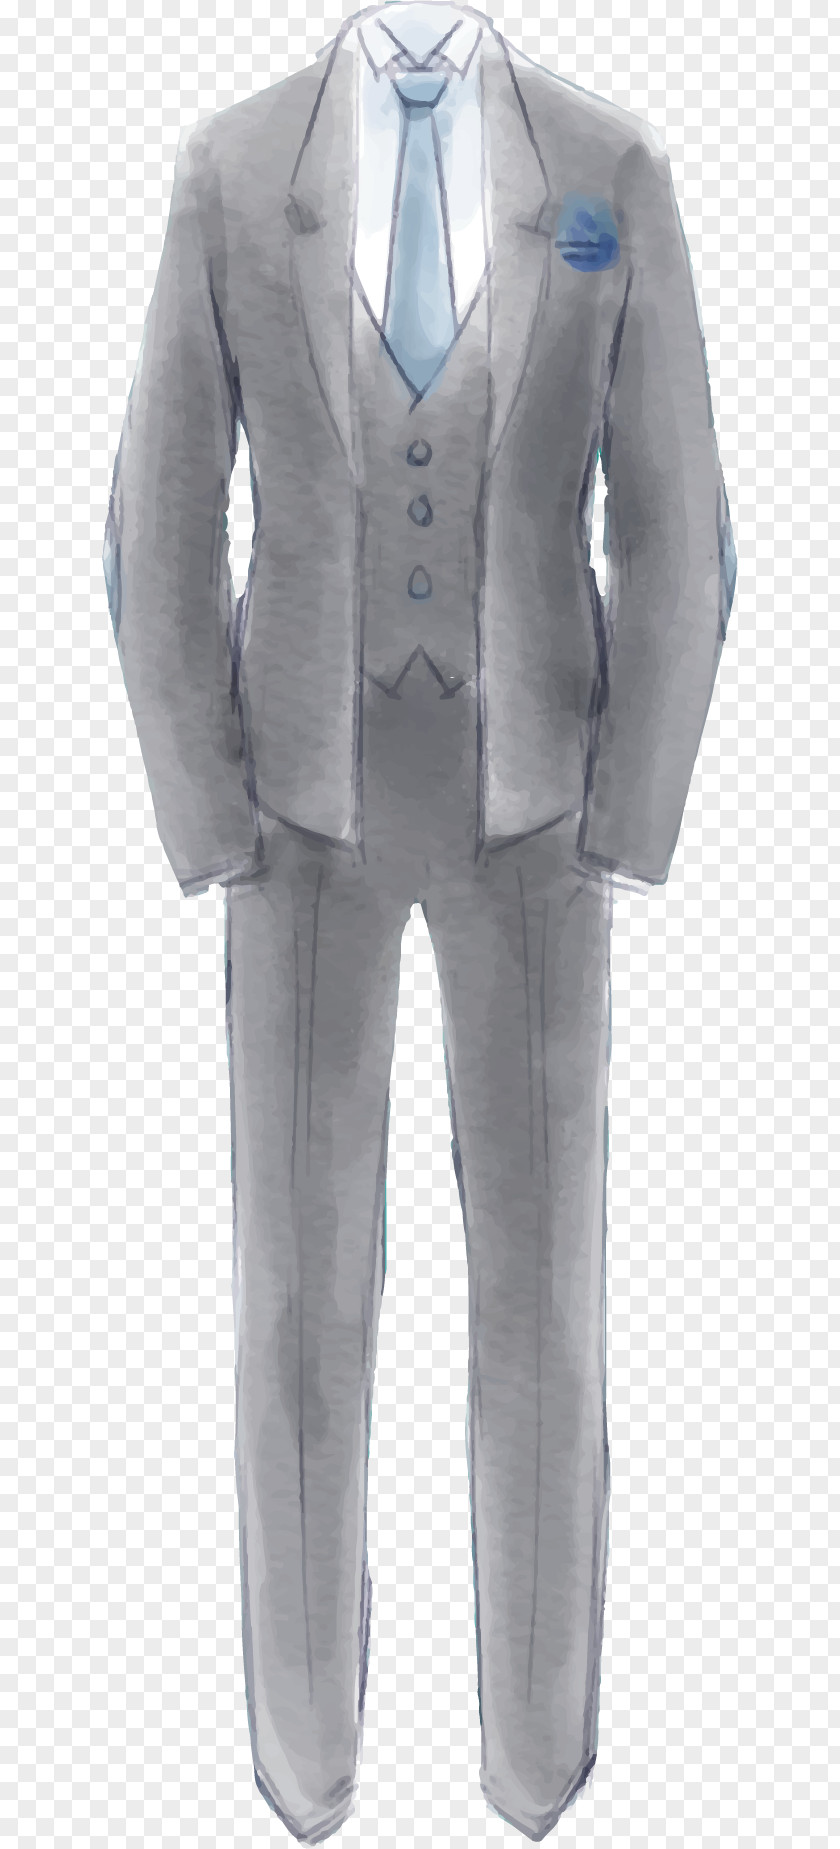 Suit Vector Tuxedo Contemporary Western Wedding Dress Drawing PNG